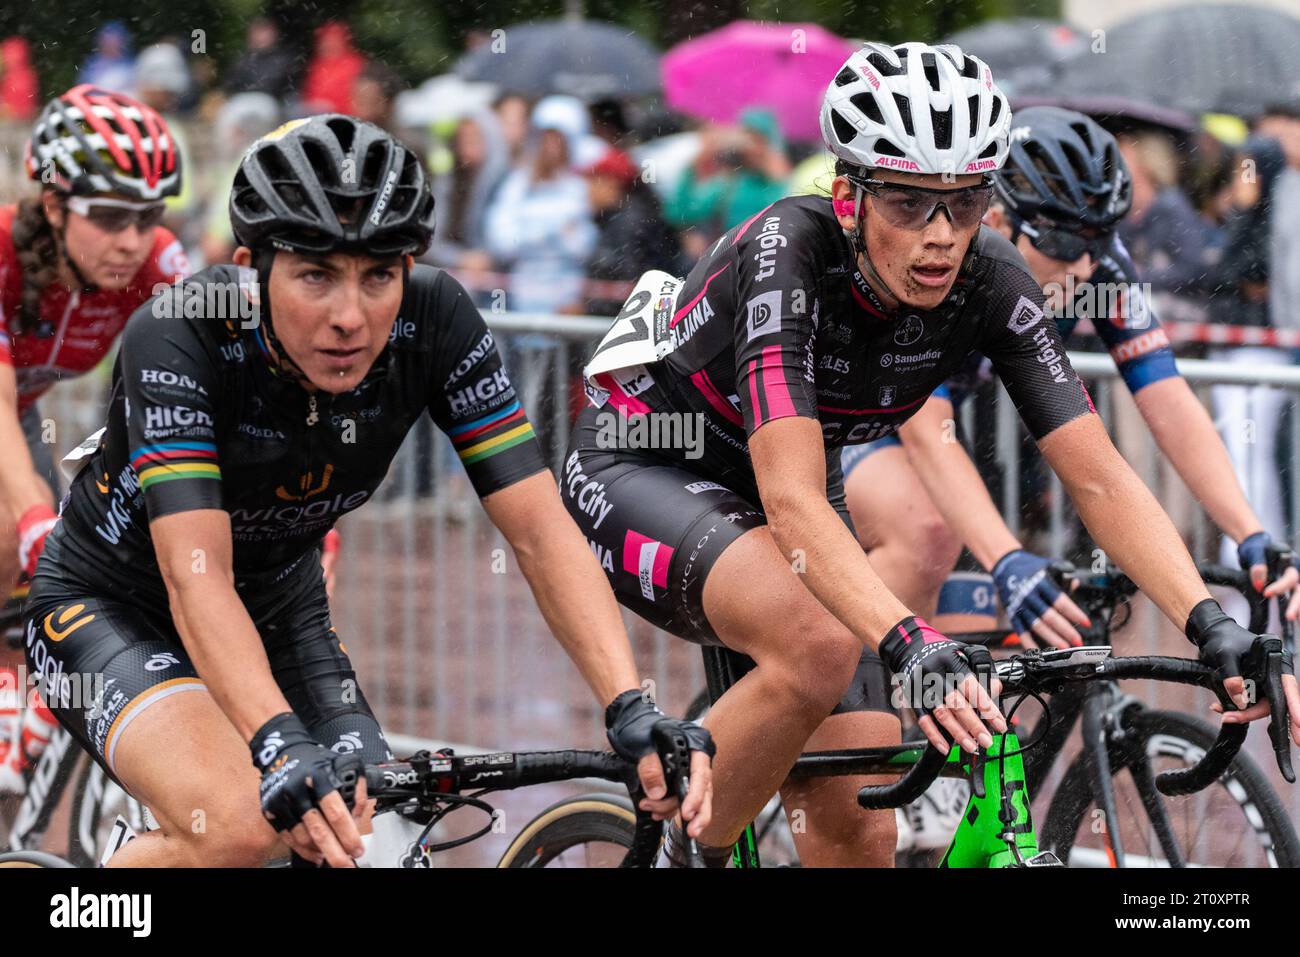 Eugenia Bujak (r) of team BTC City Ljubljana racing in RideLondon Classique UCI World Tour women's professional cycle race in Westminster, London, UK Stock Photo